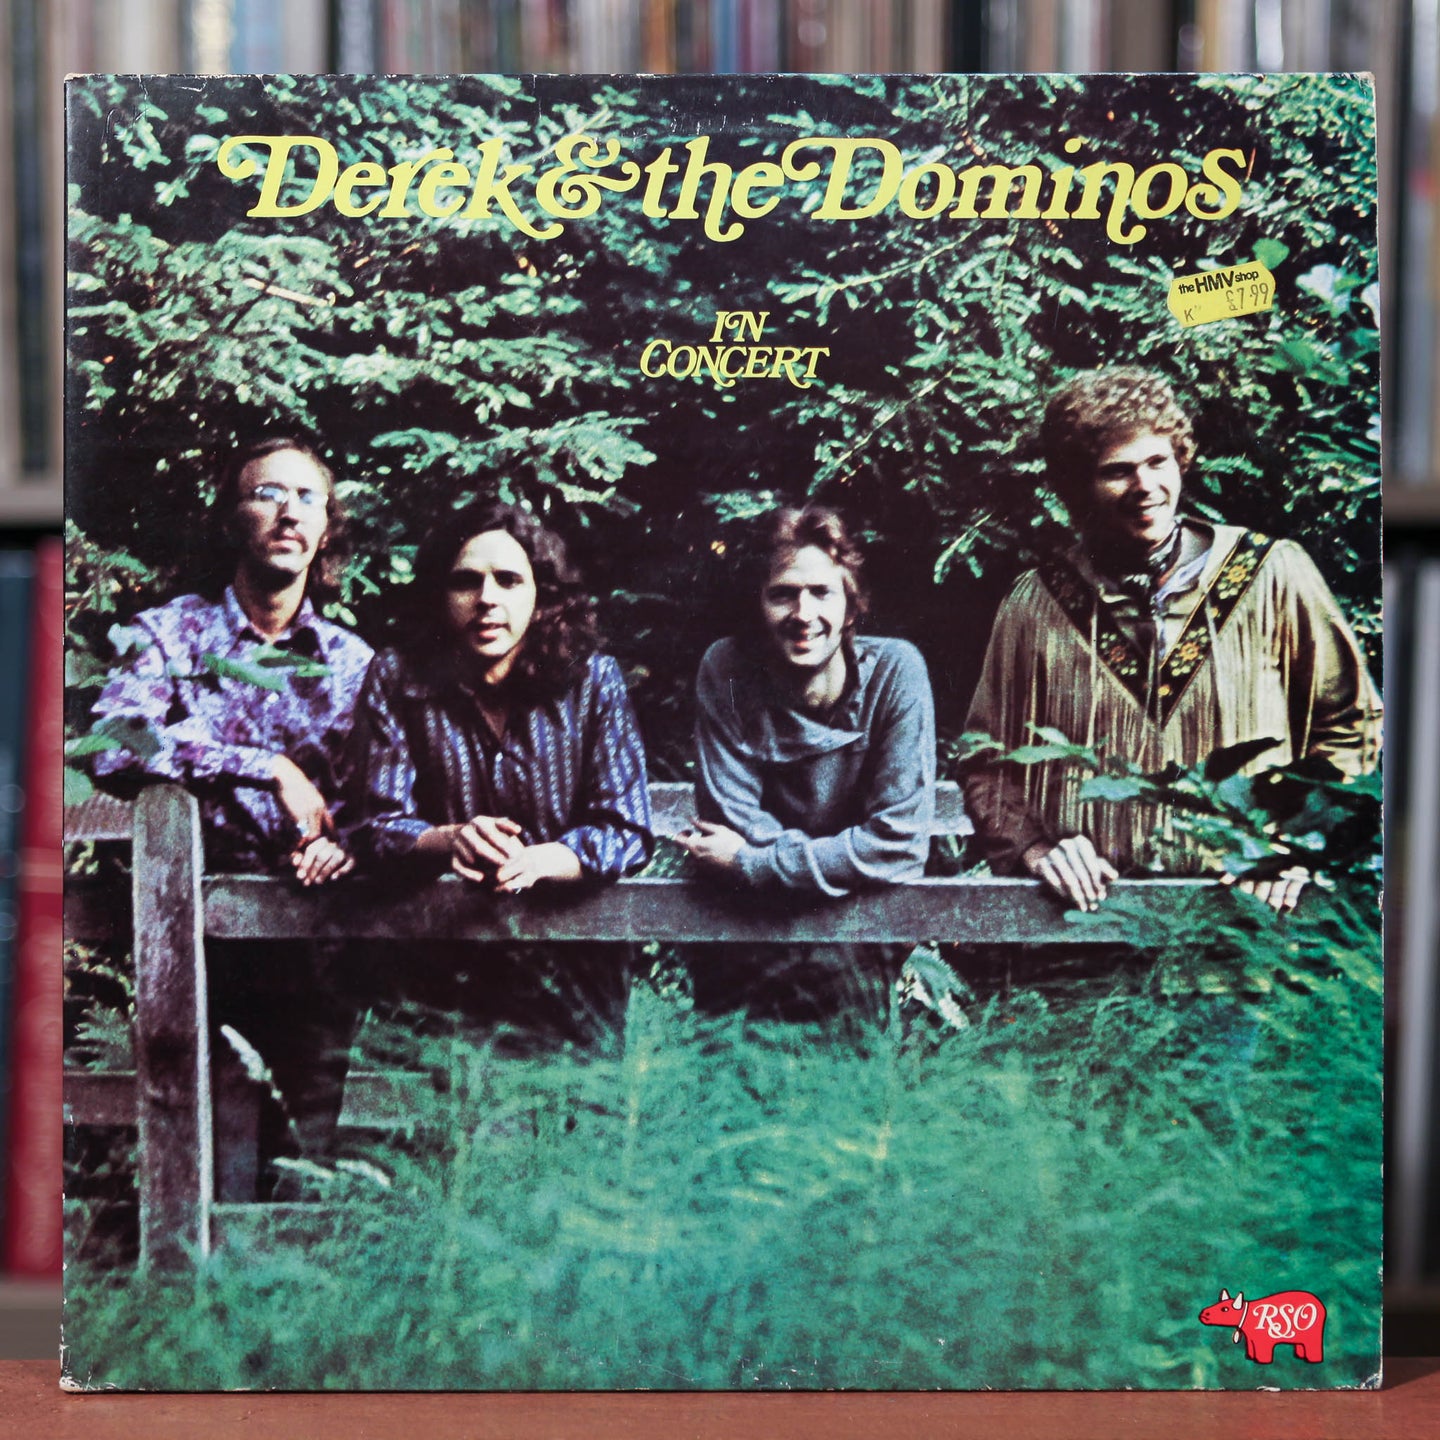 Derek And The Dominos - In Concert - Rare UK Import - 2LP - 1973 RSO,